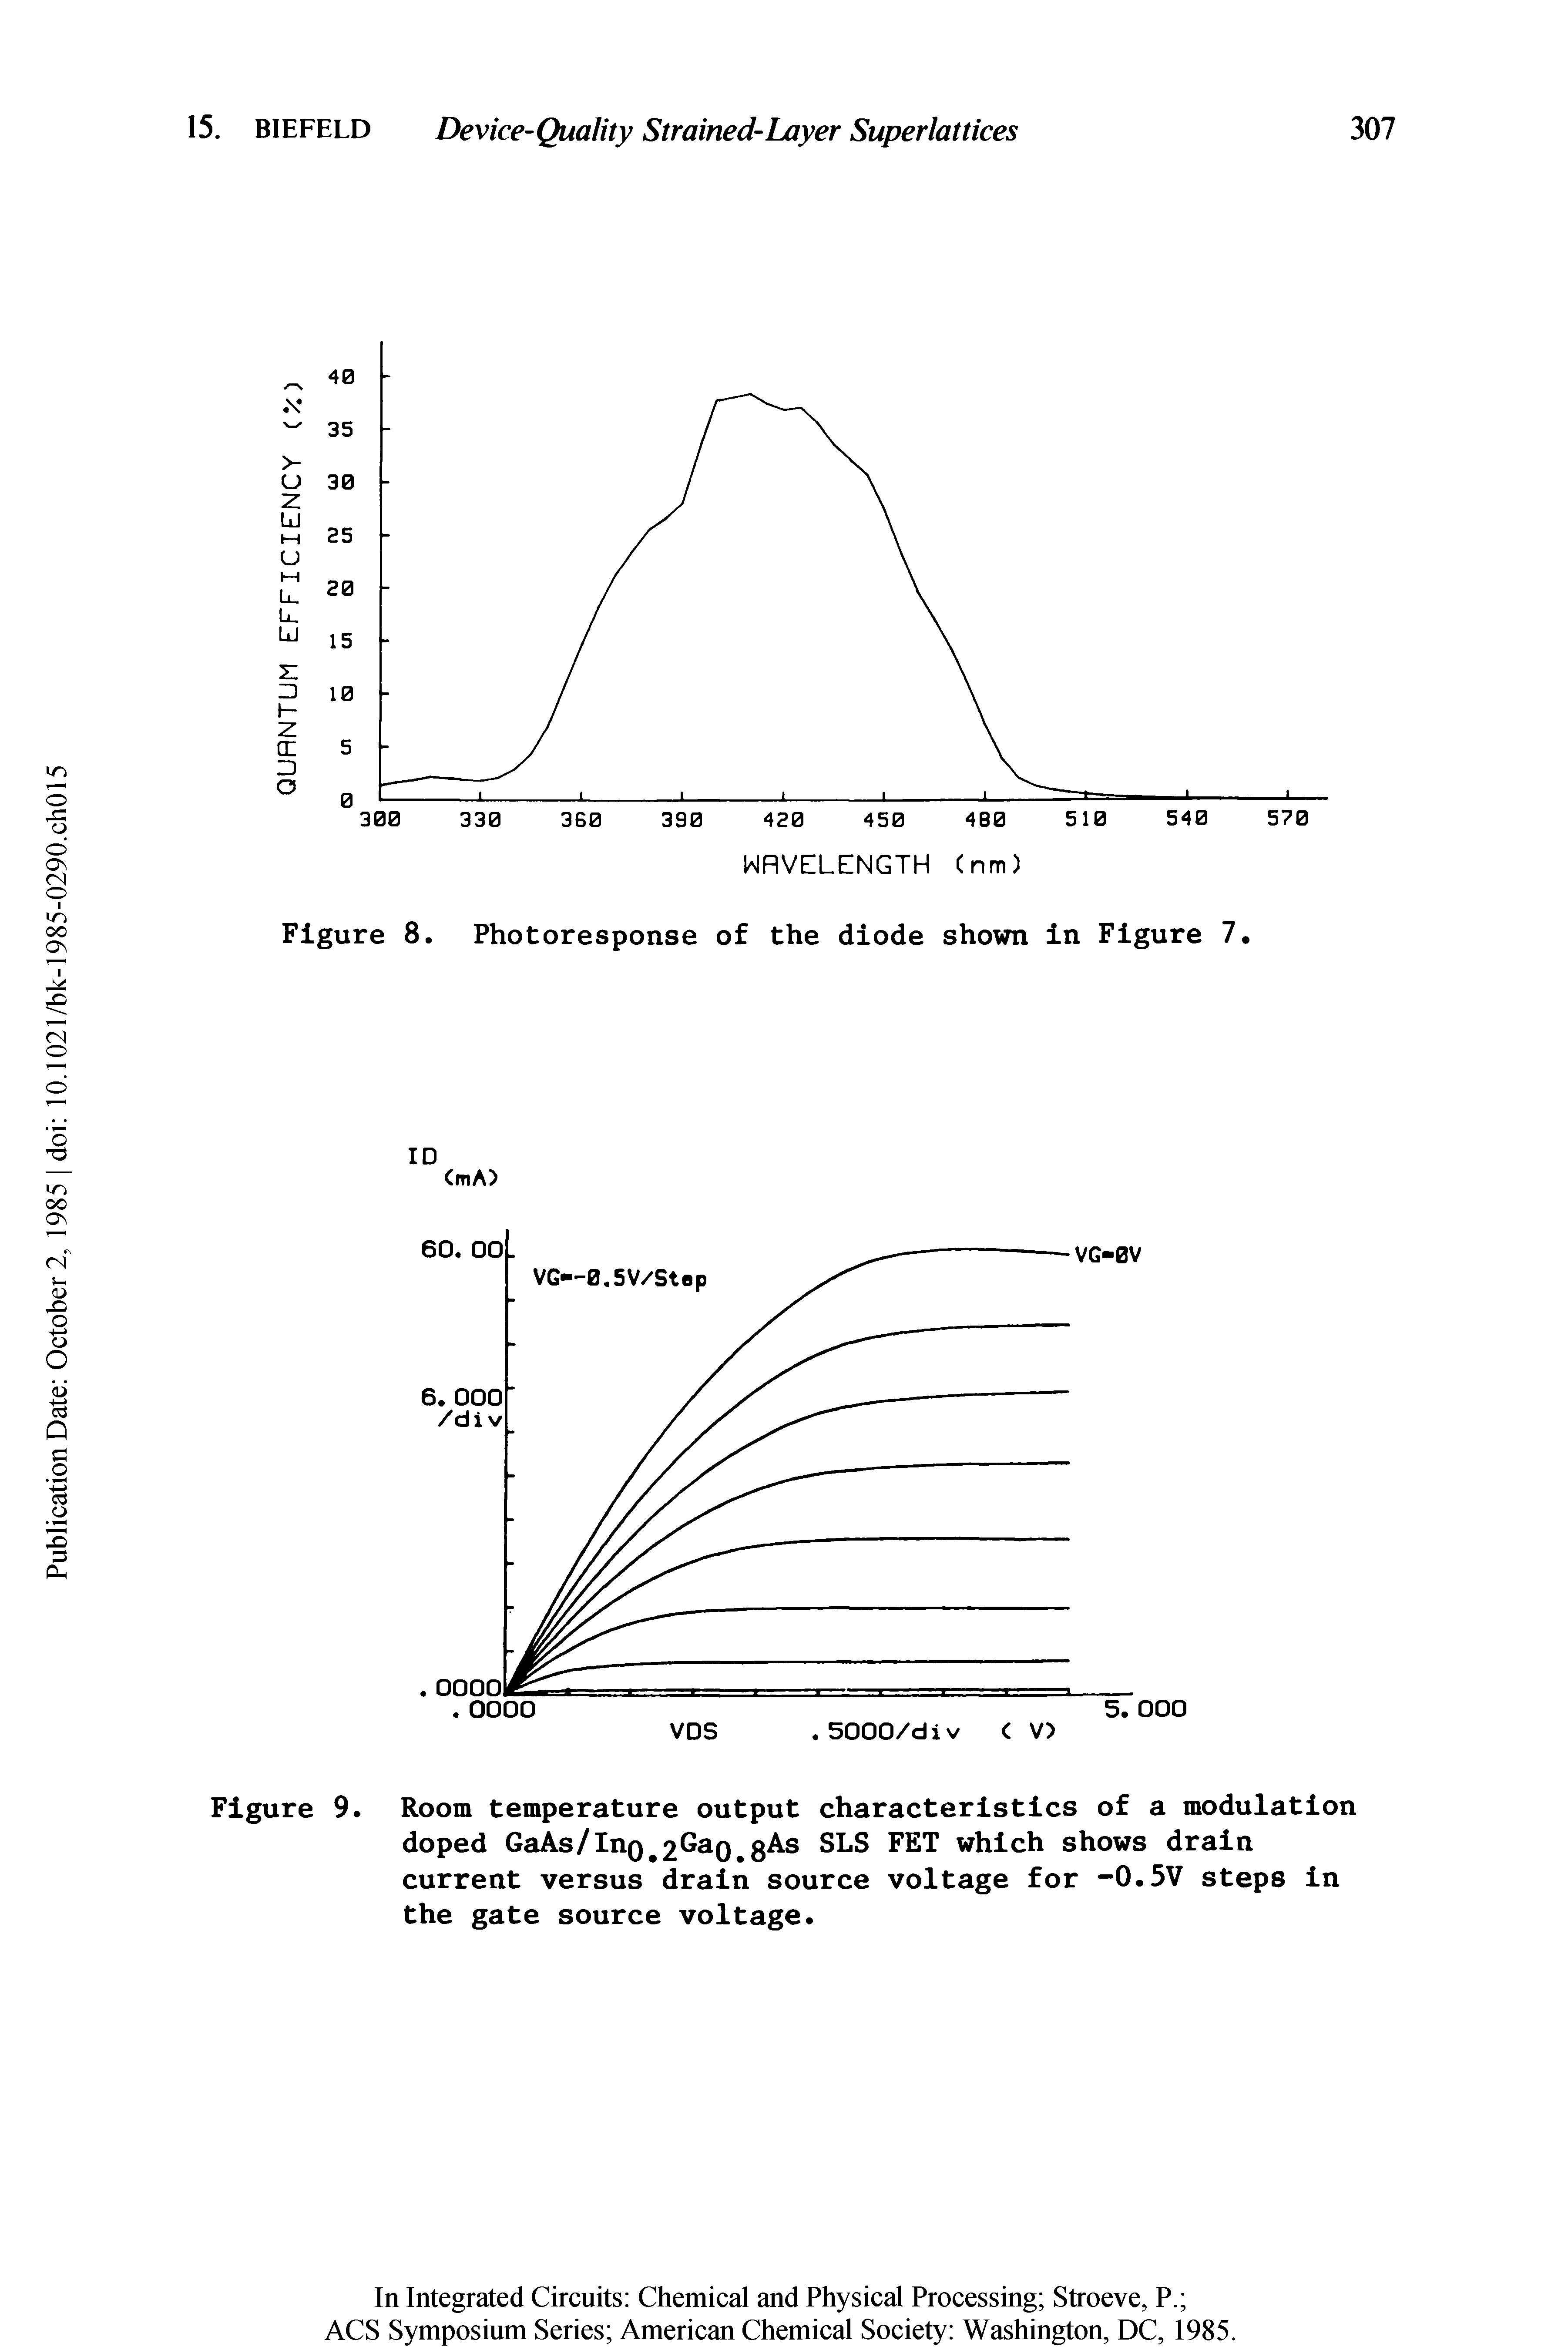 Figure 9. Room temperature output characteristics of a modulation doped GaAs/InQe2GaQegAs SLS FET which shows drain current versus drain source voltage for -0.5V steps in the gate source voltage.